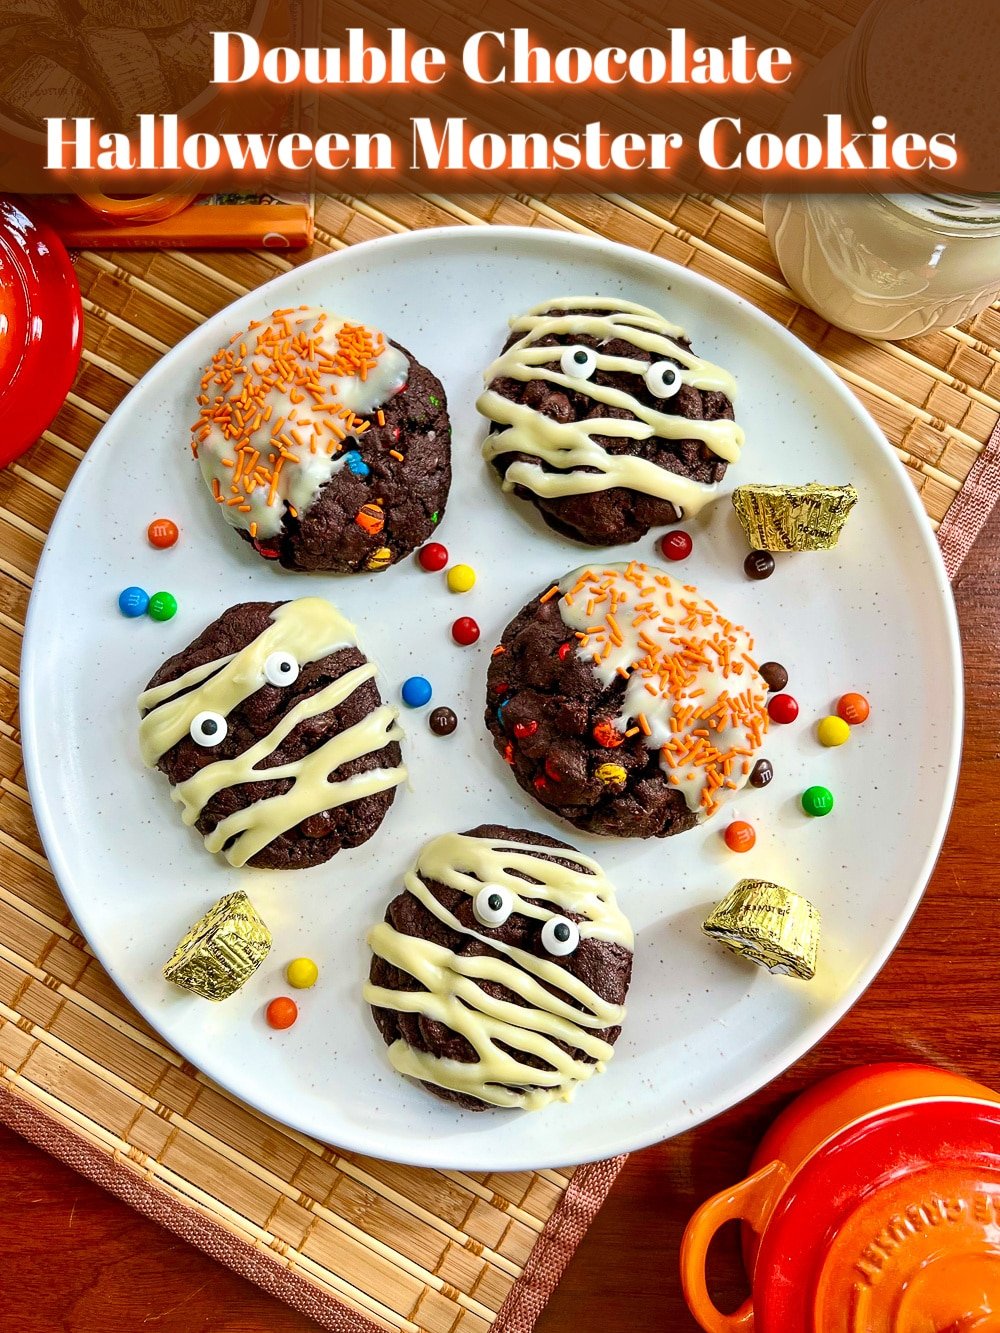 Photo of a plate of finished Double Chocolate Halloween Monster Cookies for Pinterest